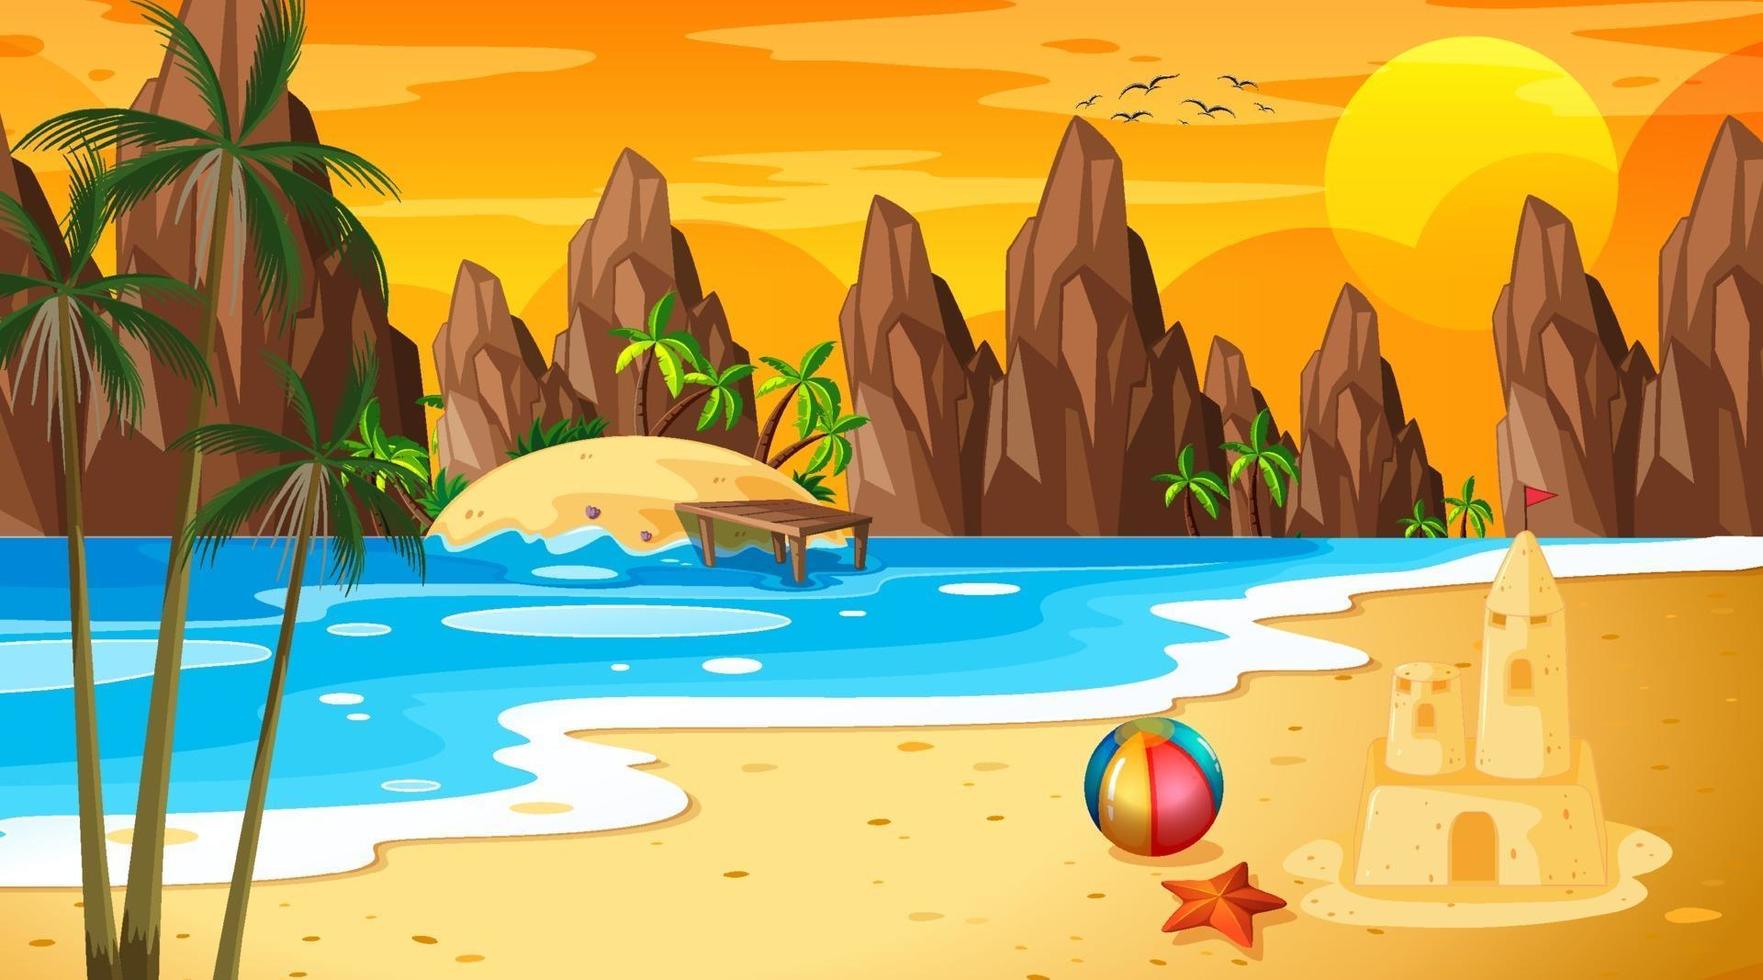 Tropical beach landscape scene with sand castle at sunset time vector